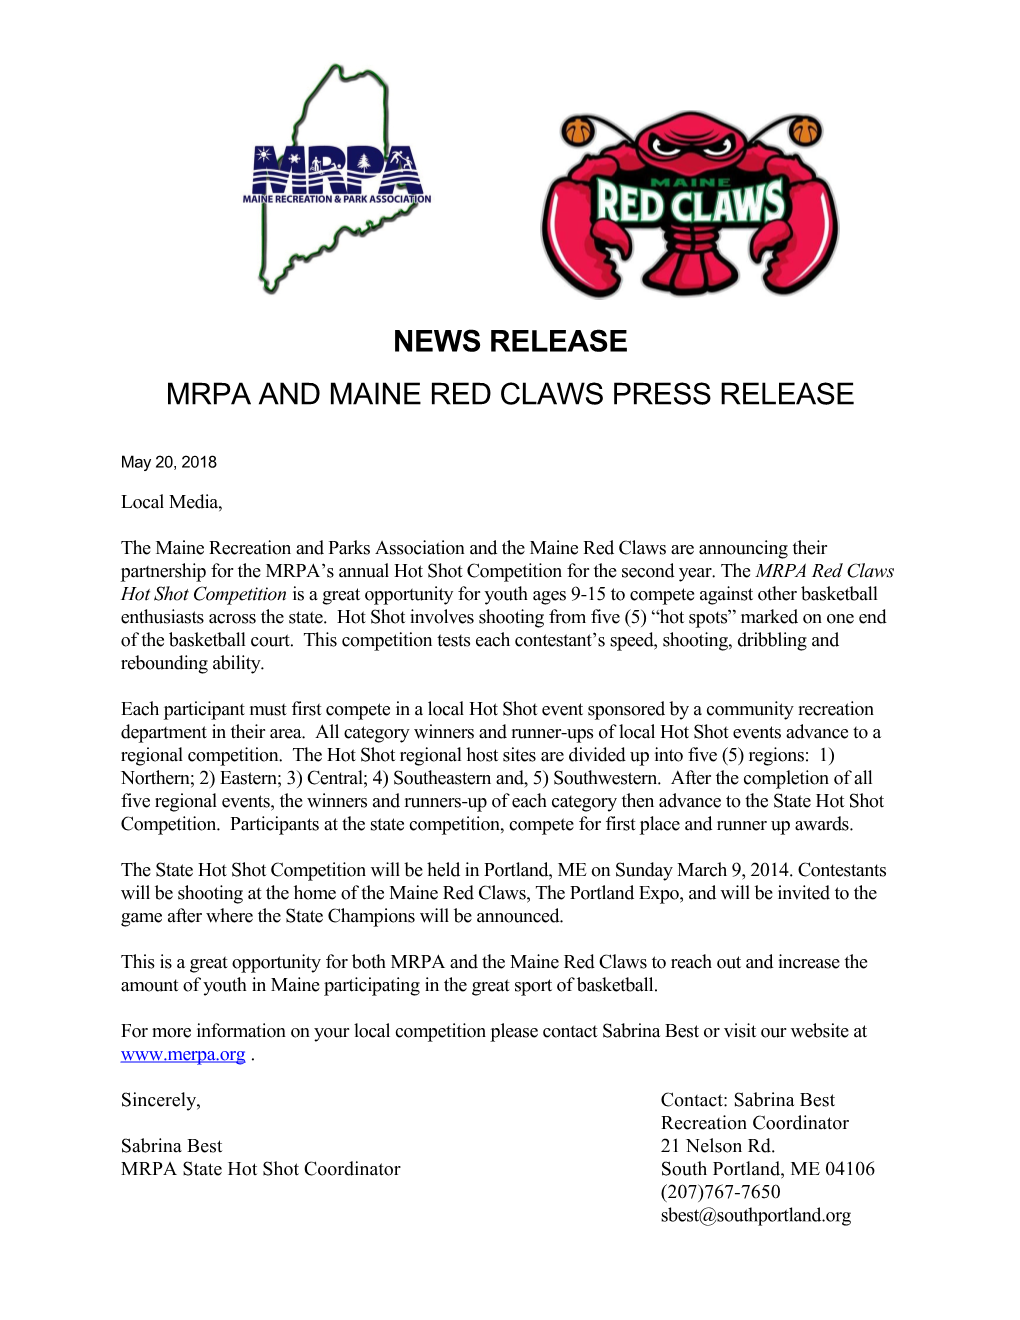 Mrpa and Maine Red Claws Press Release